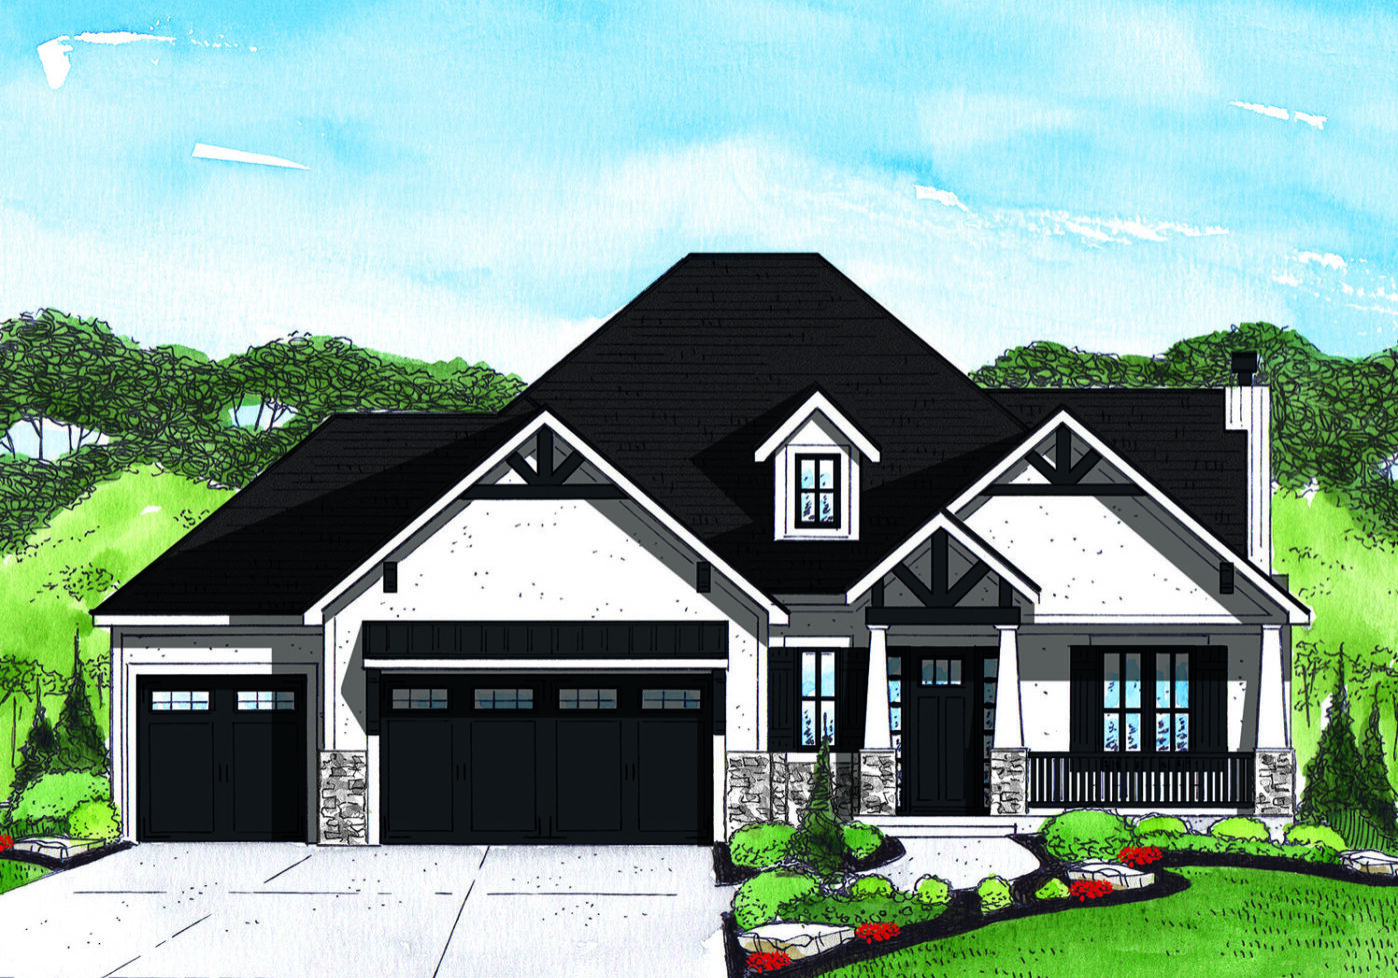 A drawing of a house with black trim and white stone accents.